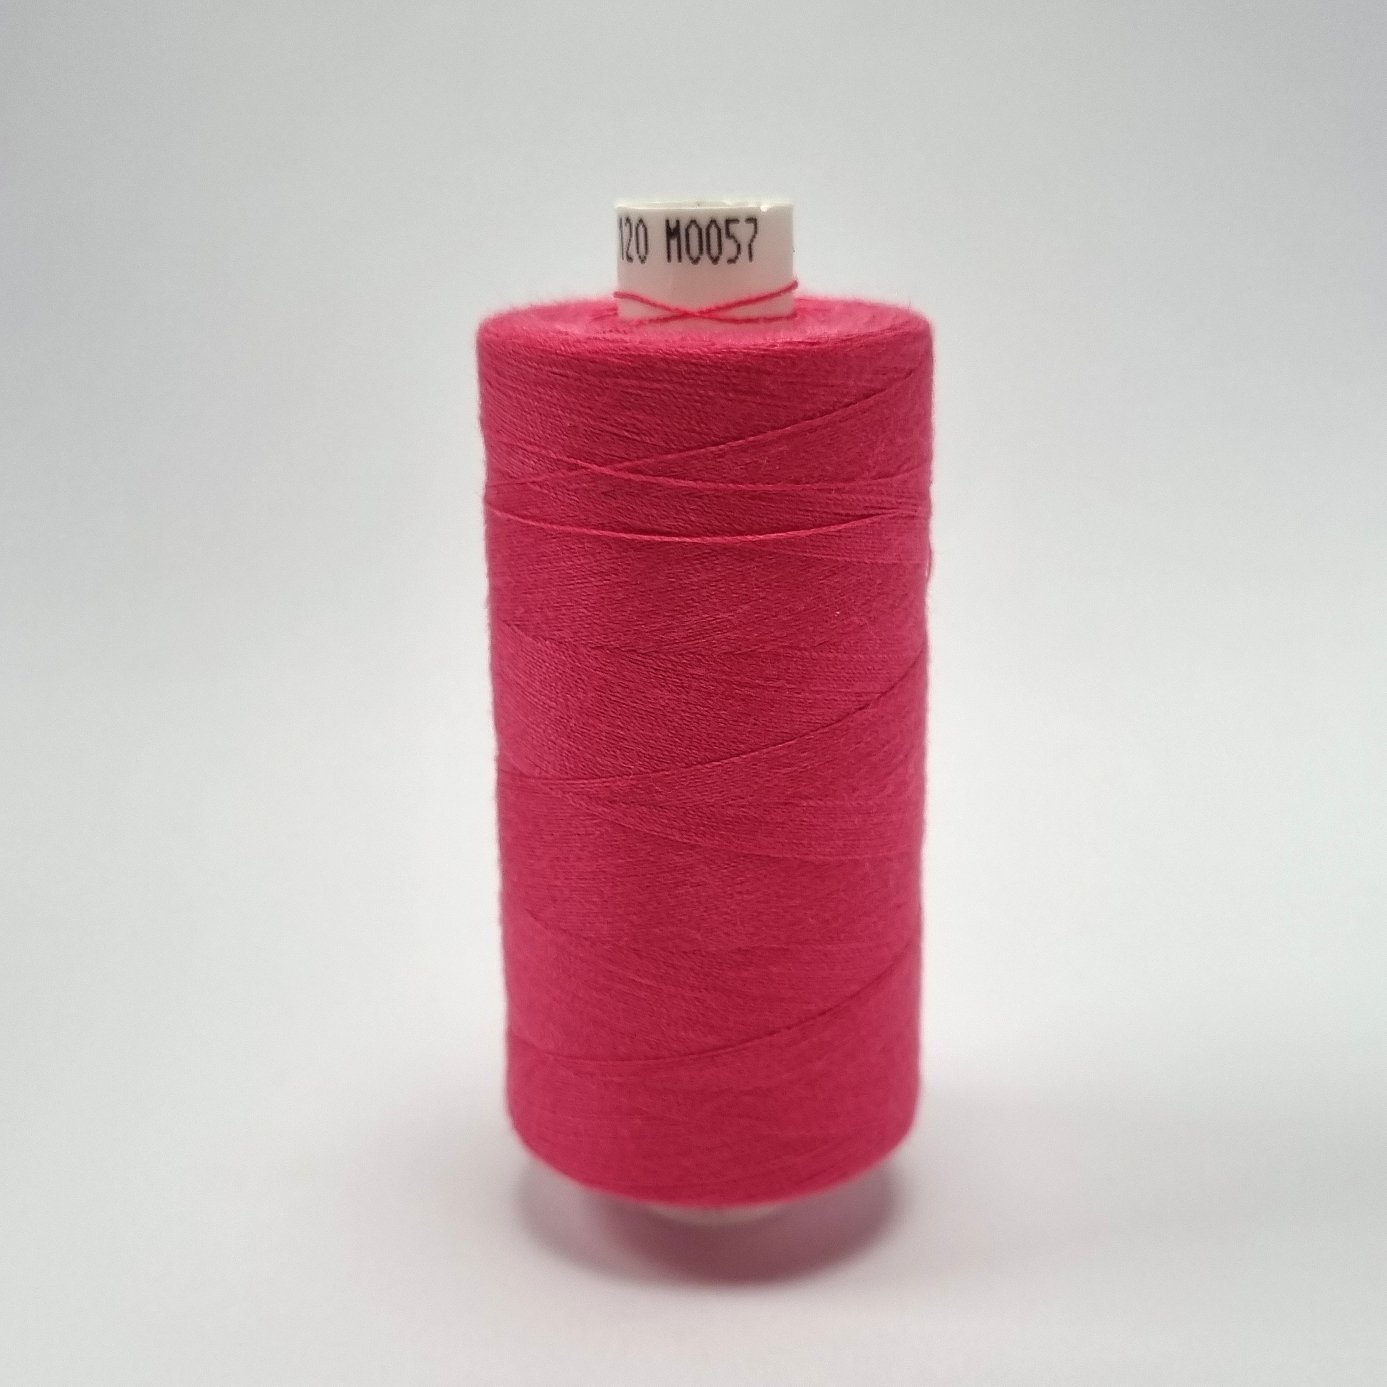 Moon Thread, Shocking Pink, 1000 yard reels 99p from Jaycotts Sewing Supplies